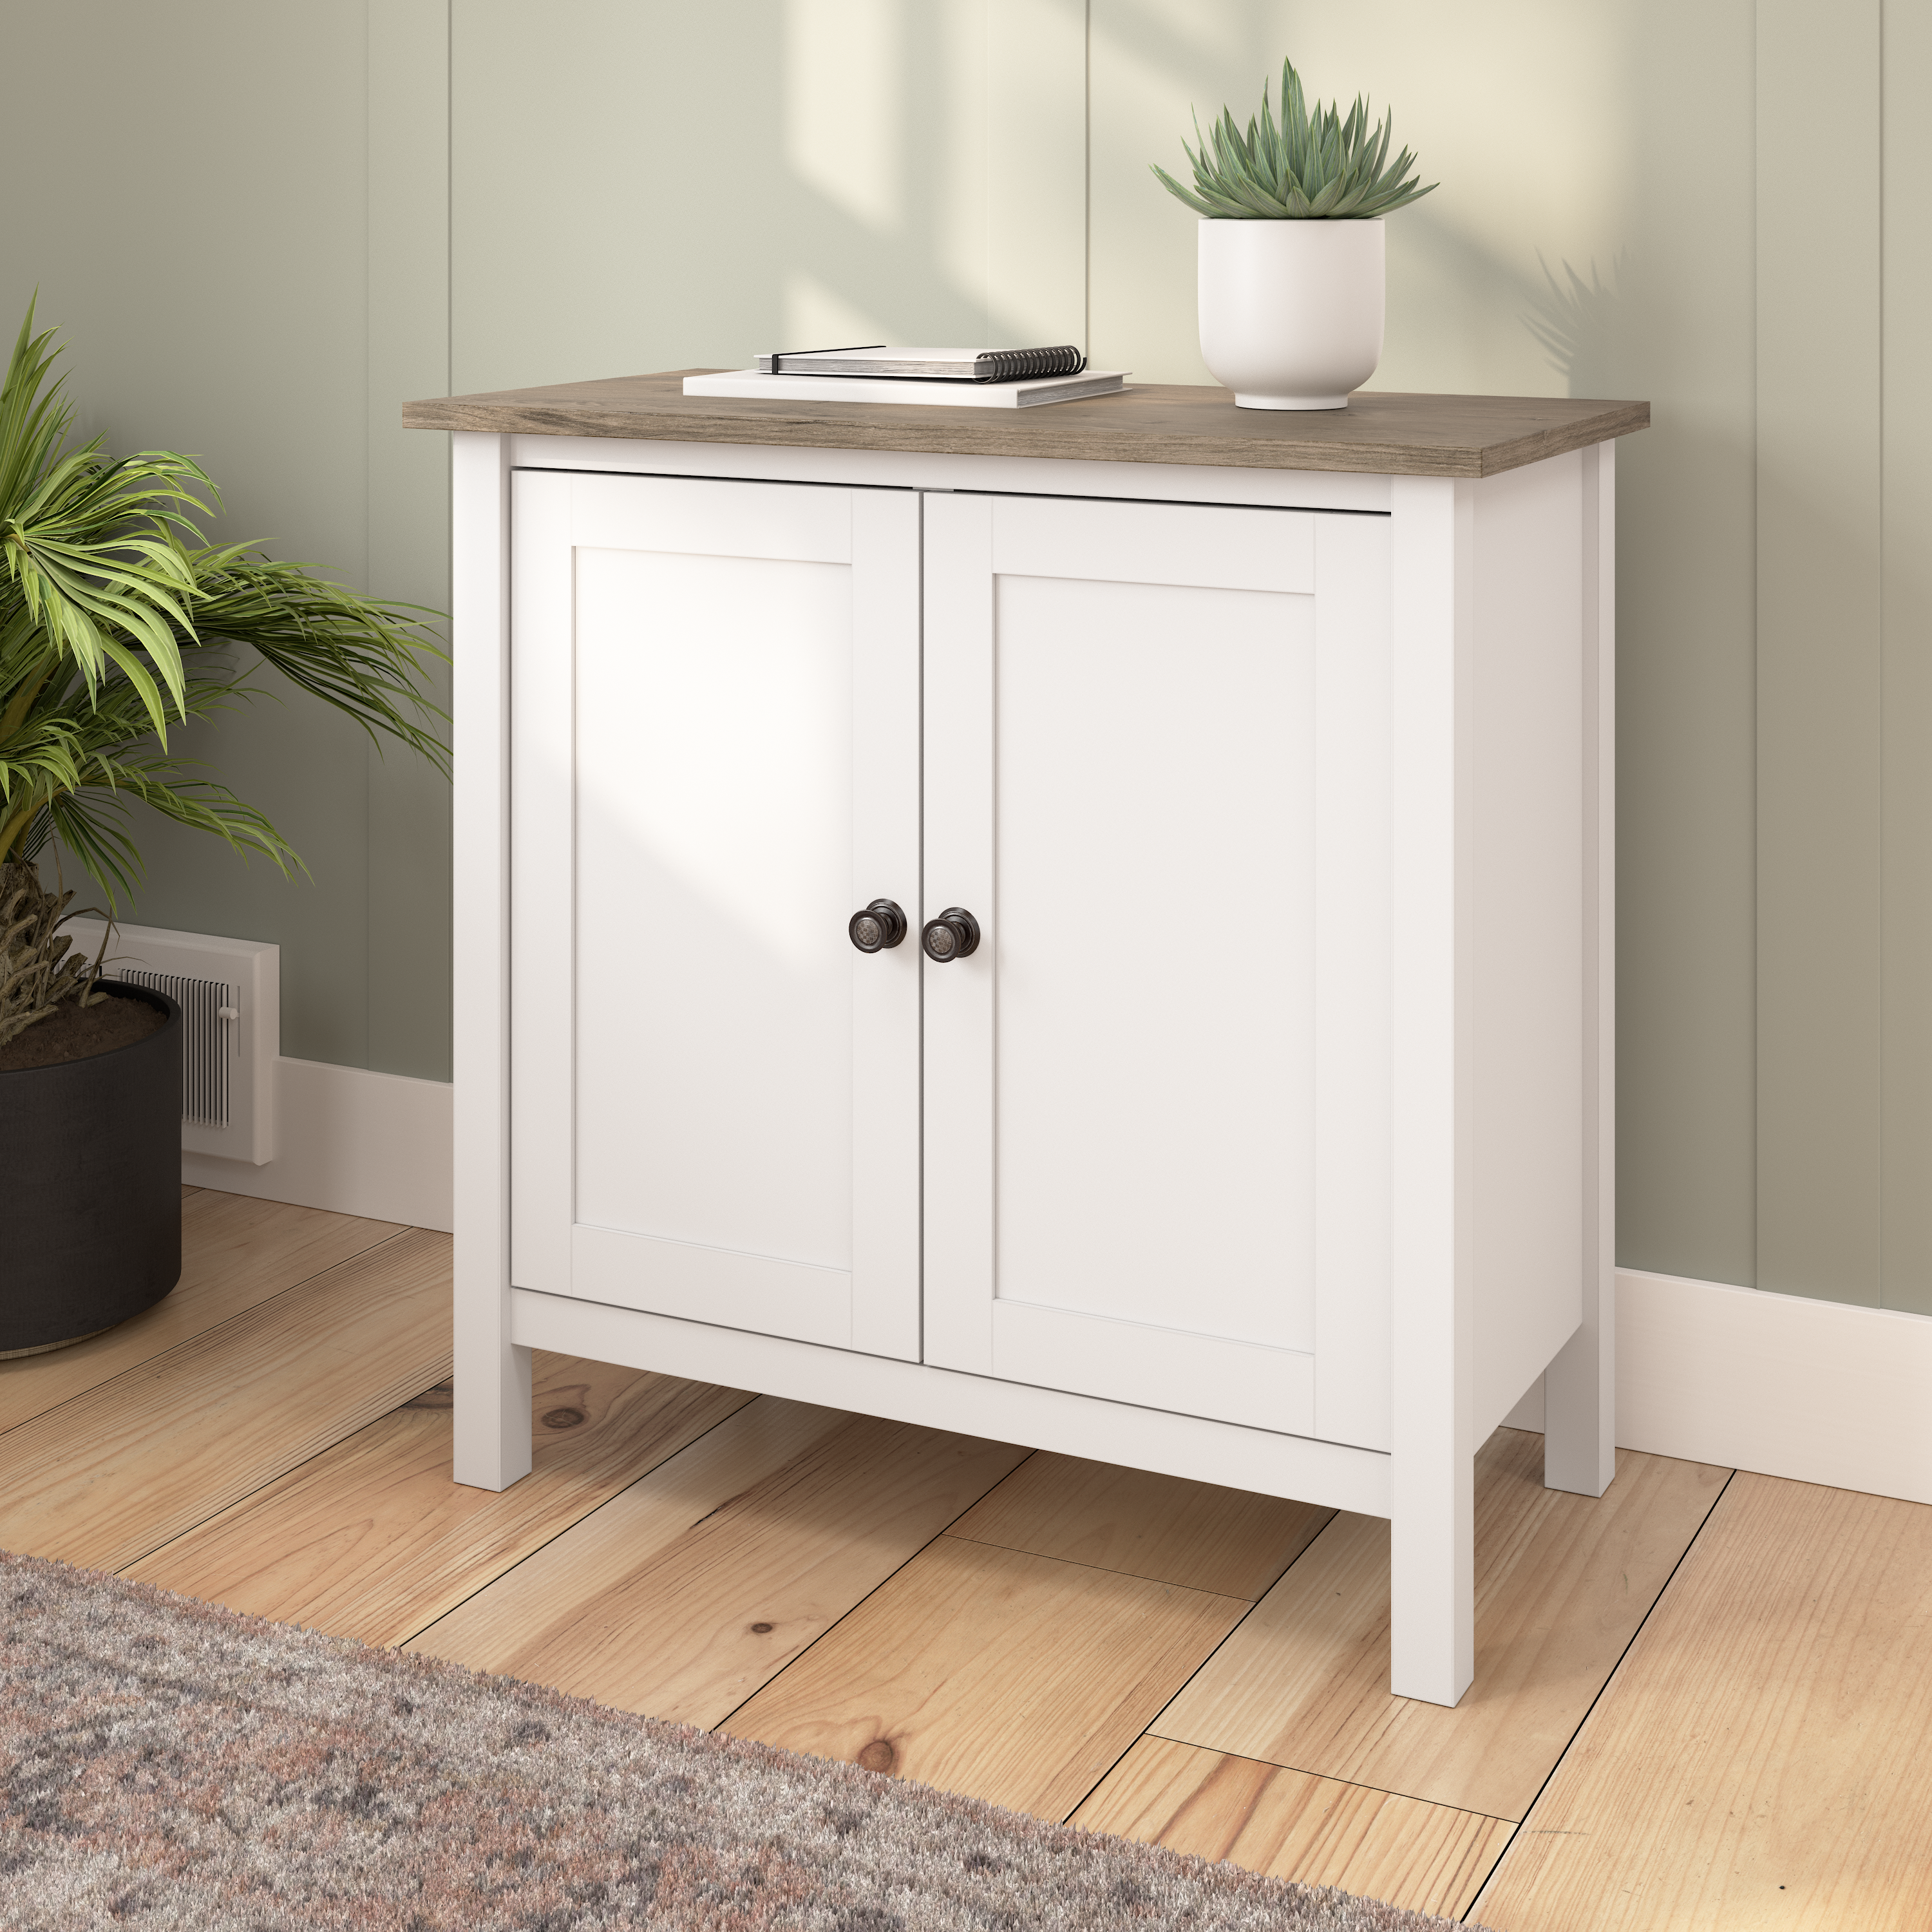 Shop Bush Furniture Mayfield Accent Storage Cabinet with Doors 01 MAS131GW2-03 #color_shiplap gray/pure white